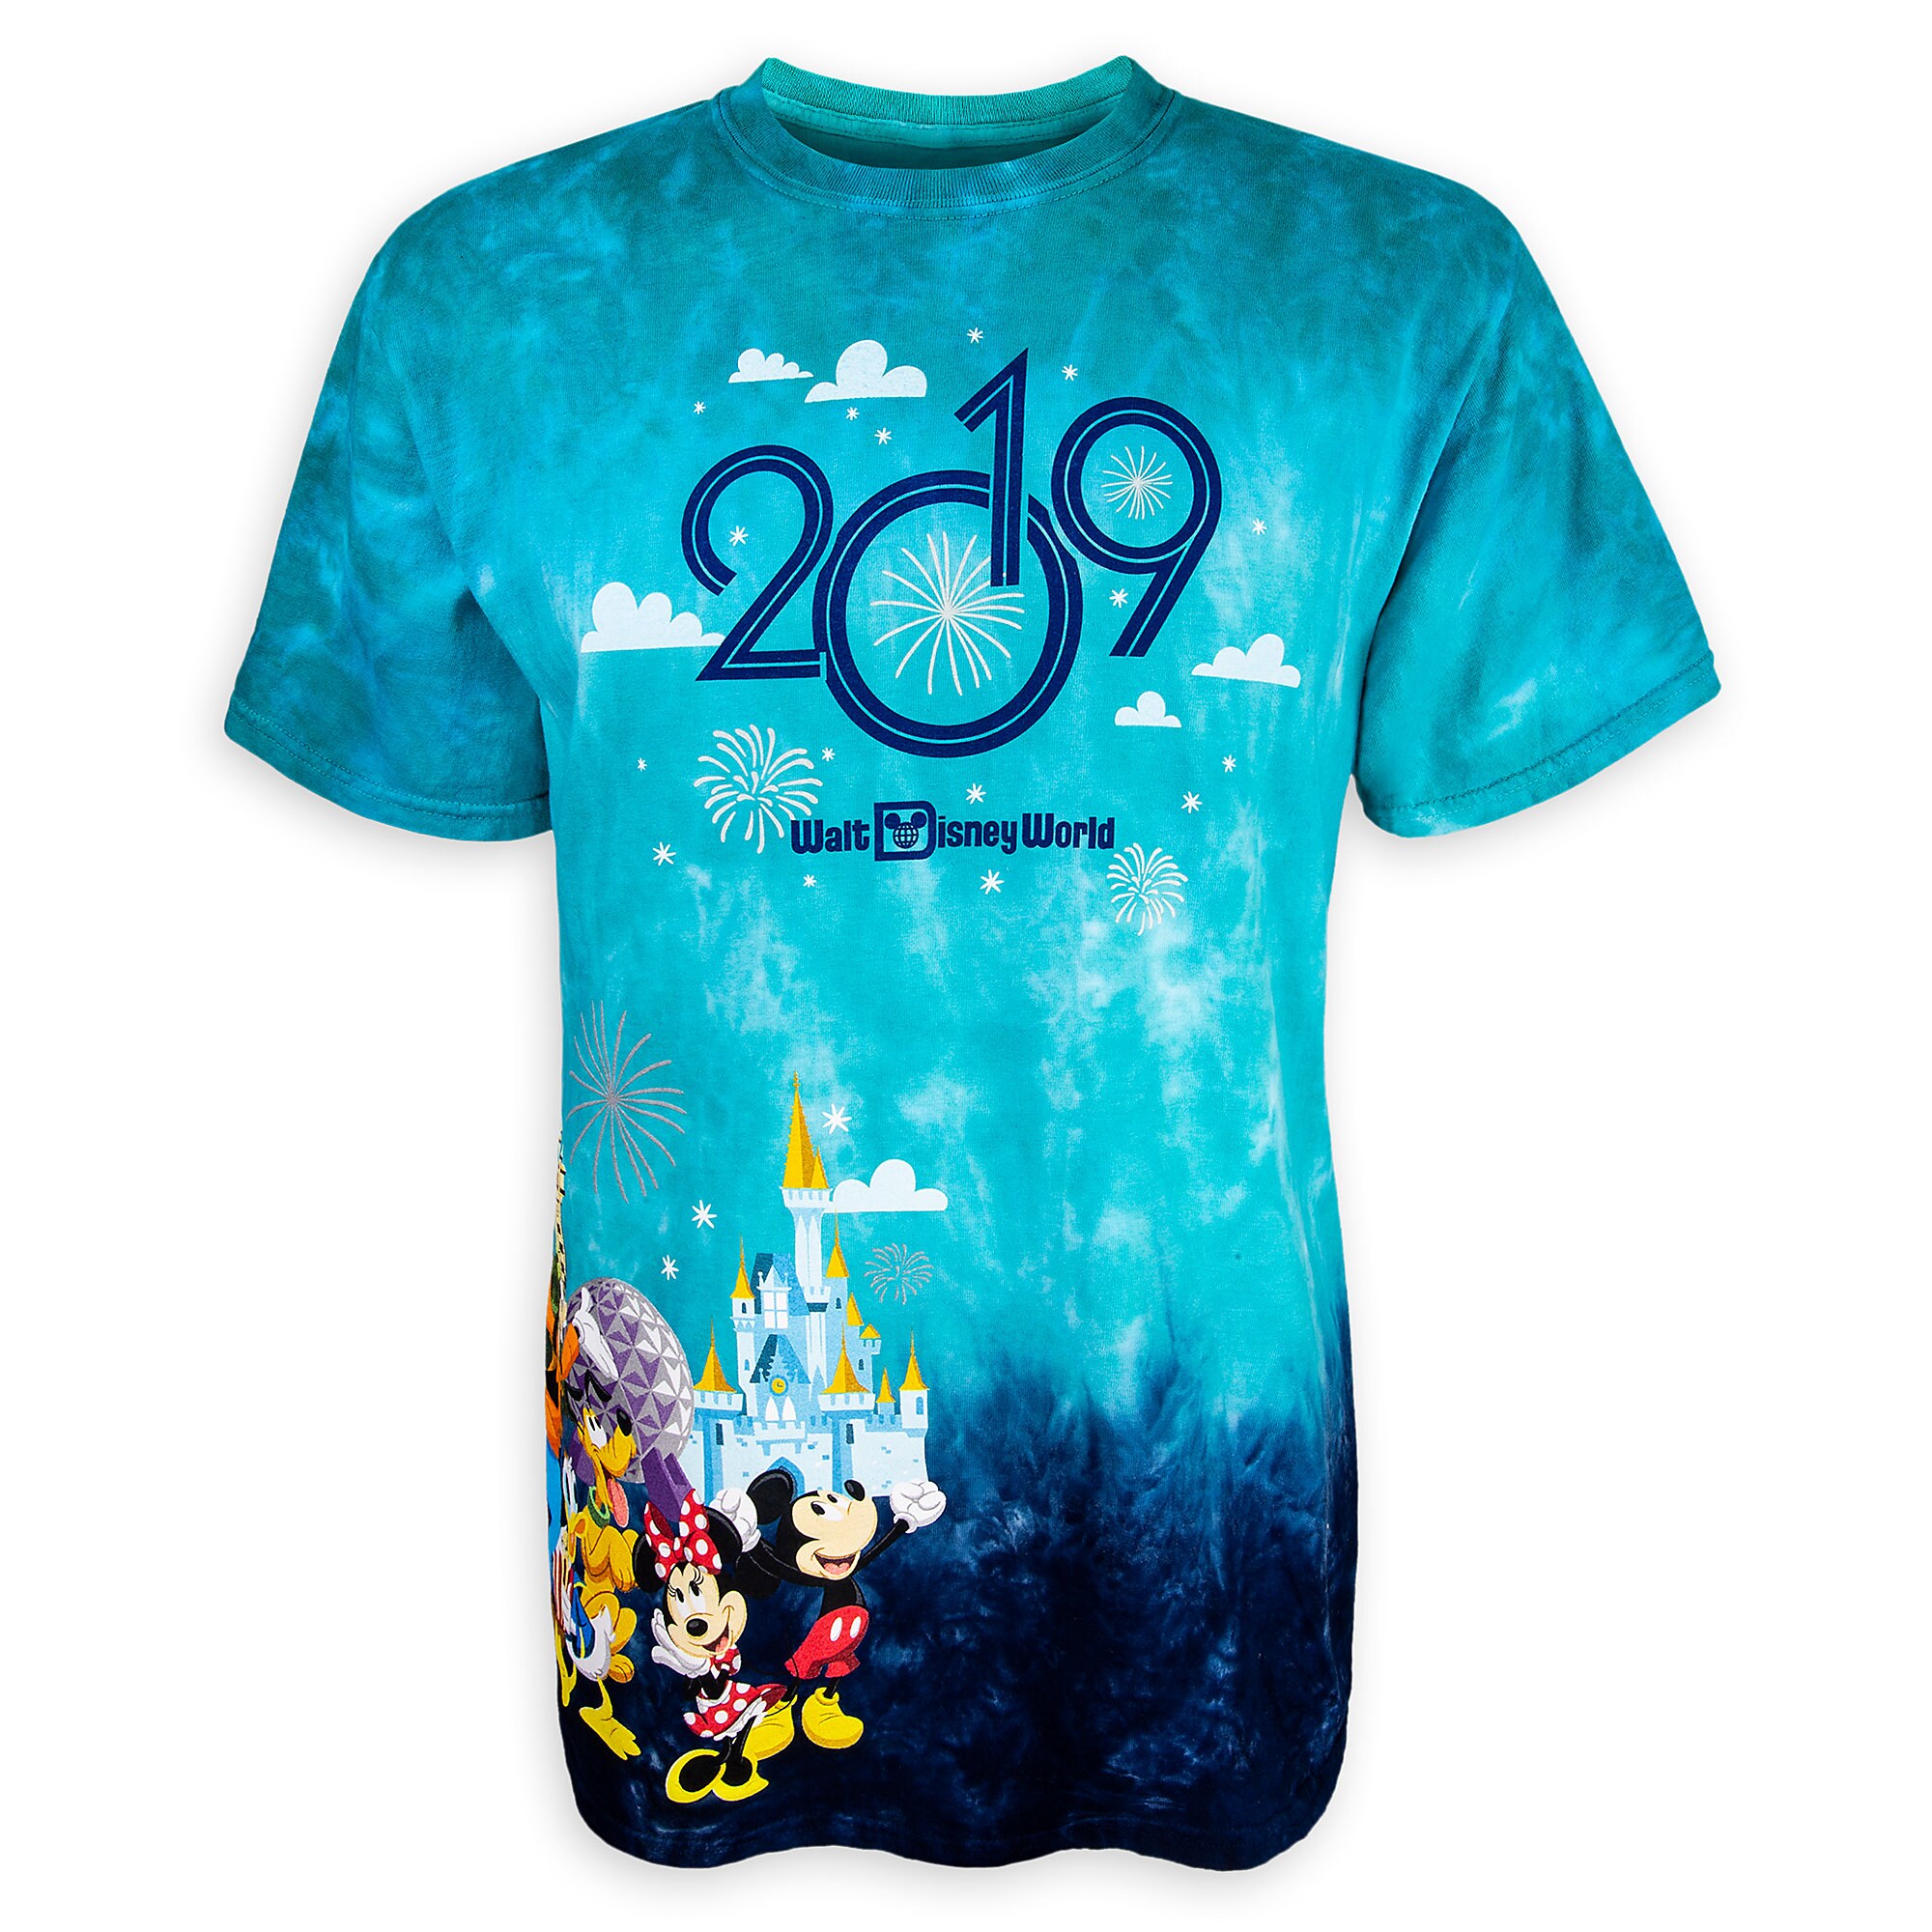 Mickey Mouse and Friends Tie-Dye T-Shirt for Adults - Walt Disney World 2019